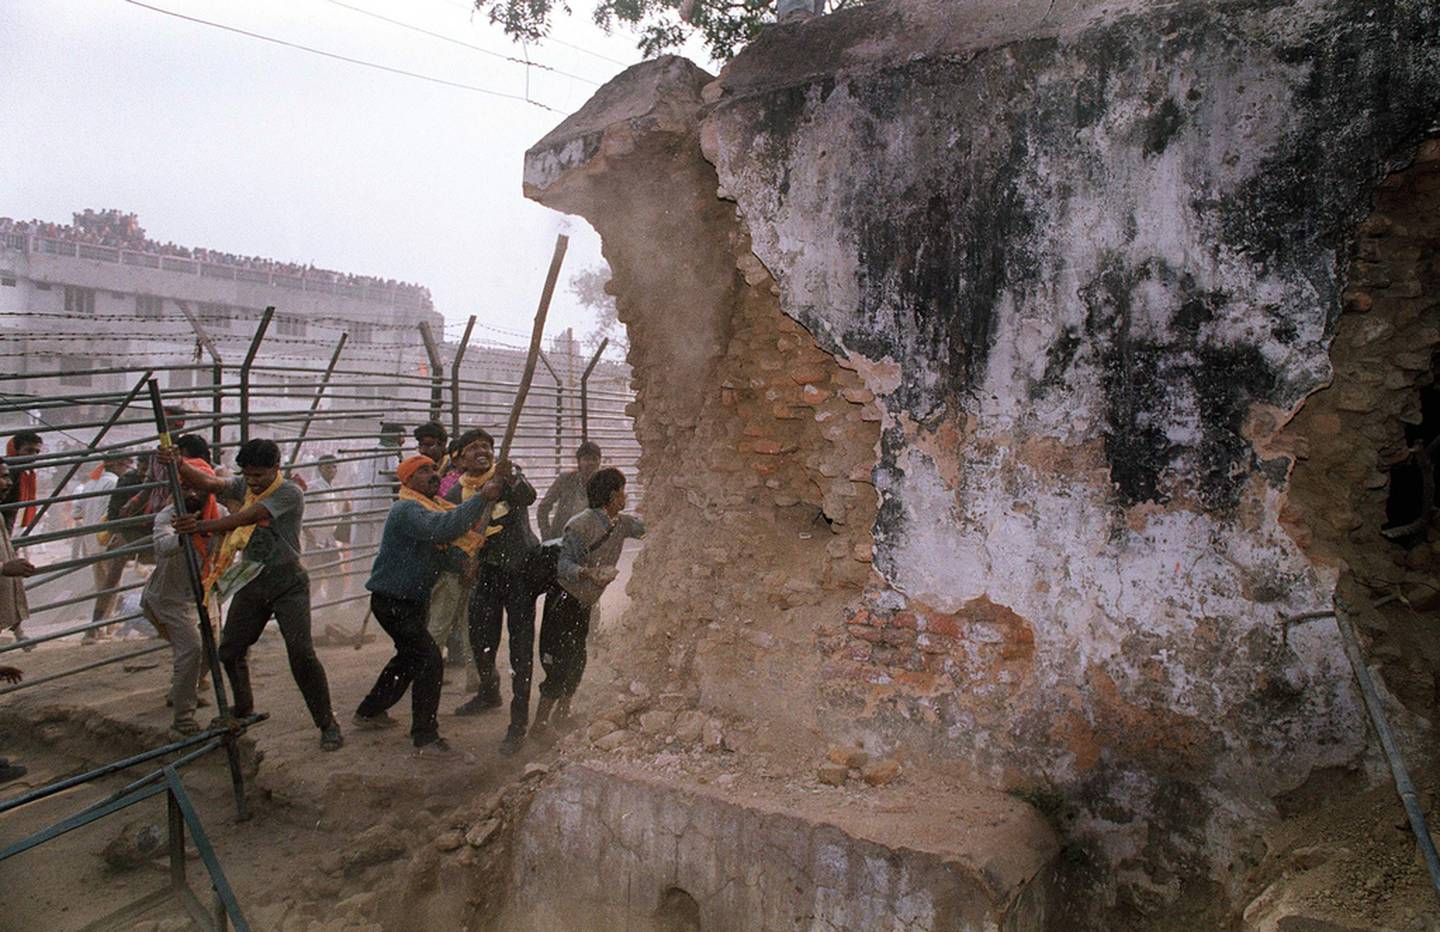 Indian Hindu fundamentalists attack the wall of the 16th century Babri mosque with iron rods at a disputed holy site in the city of Ayodhya in 1992.  AFP